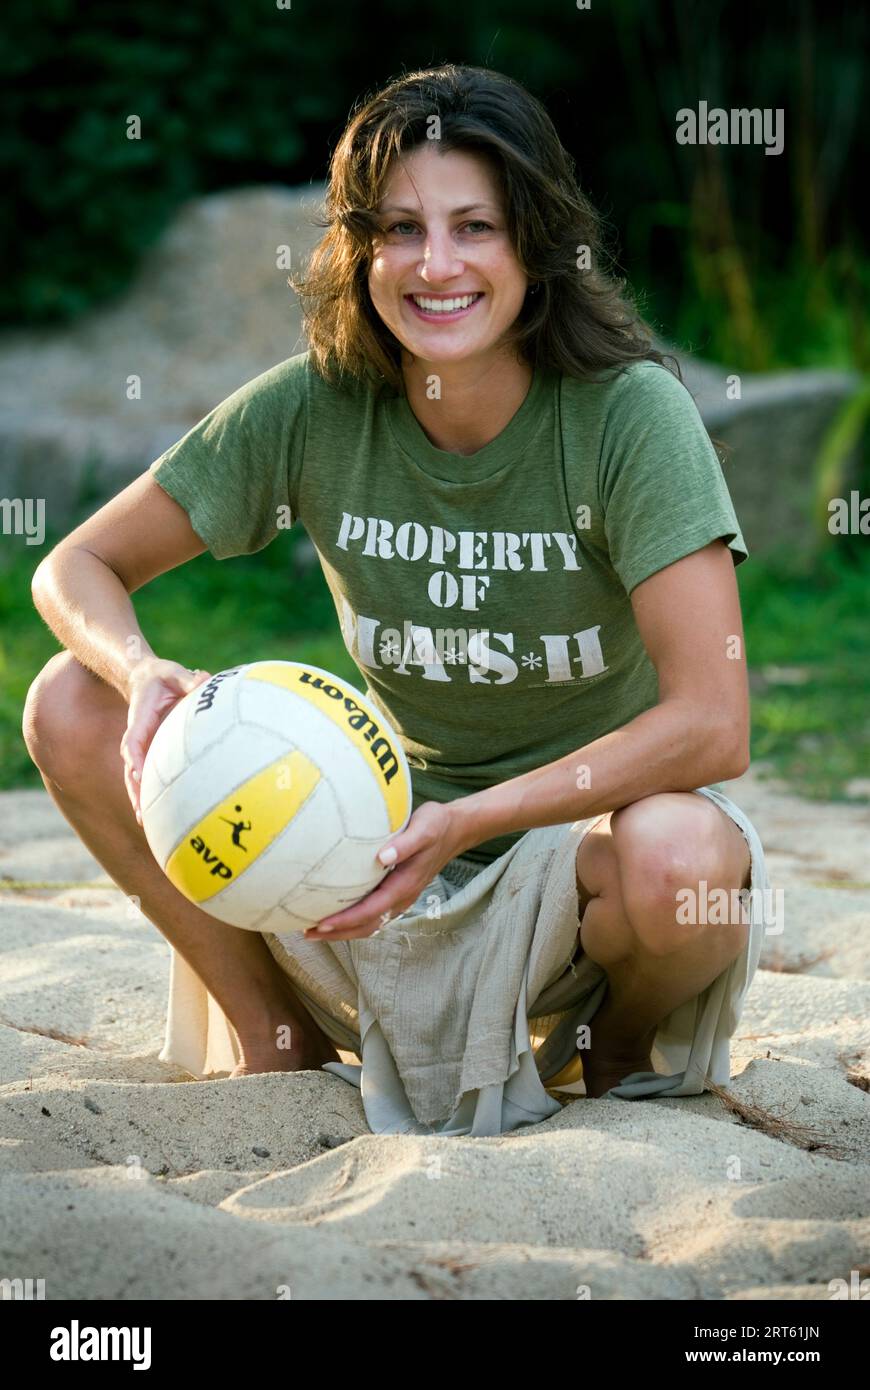 Woman smiling with volleyball on beach. Stock Photo